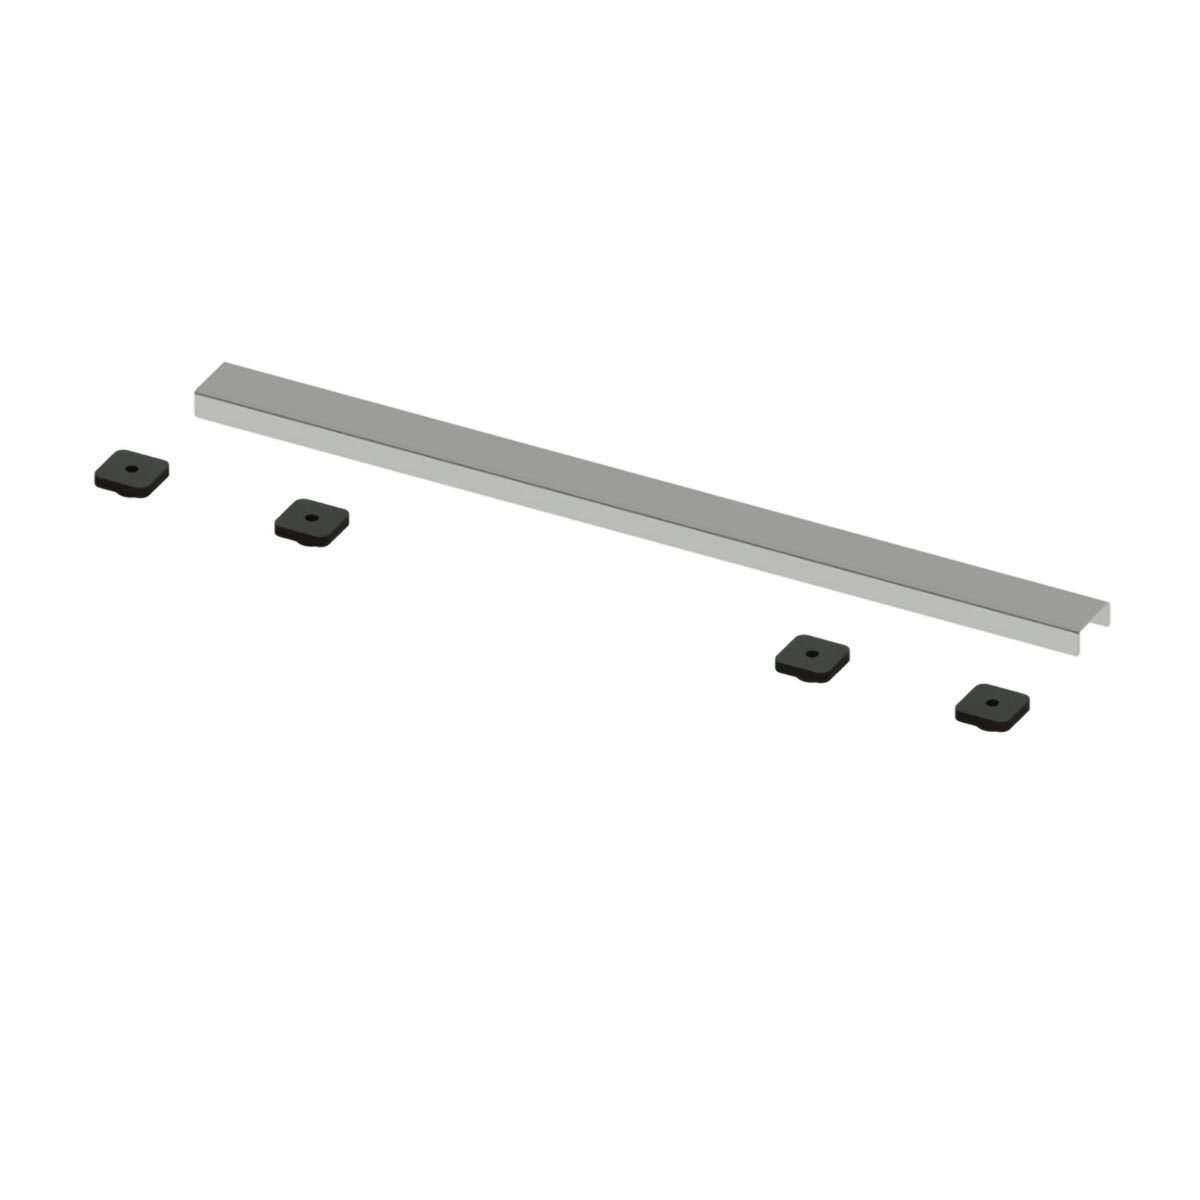 Orchard linear 600mm waste stainless steel cover plate